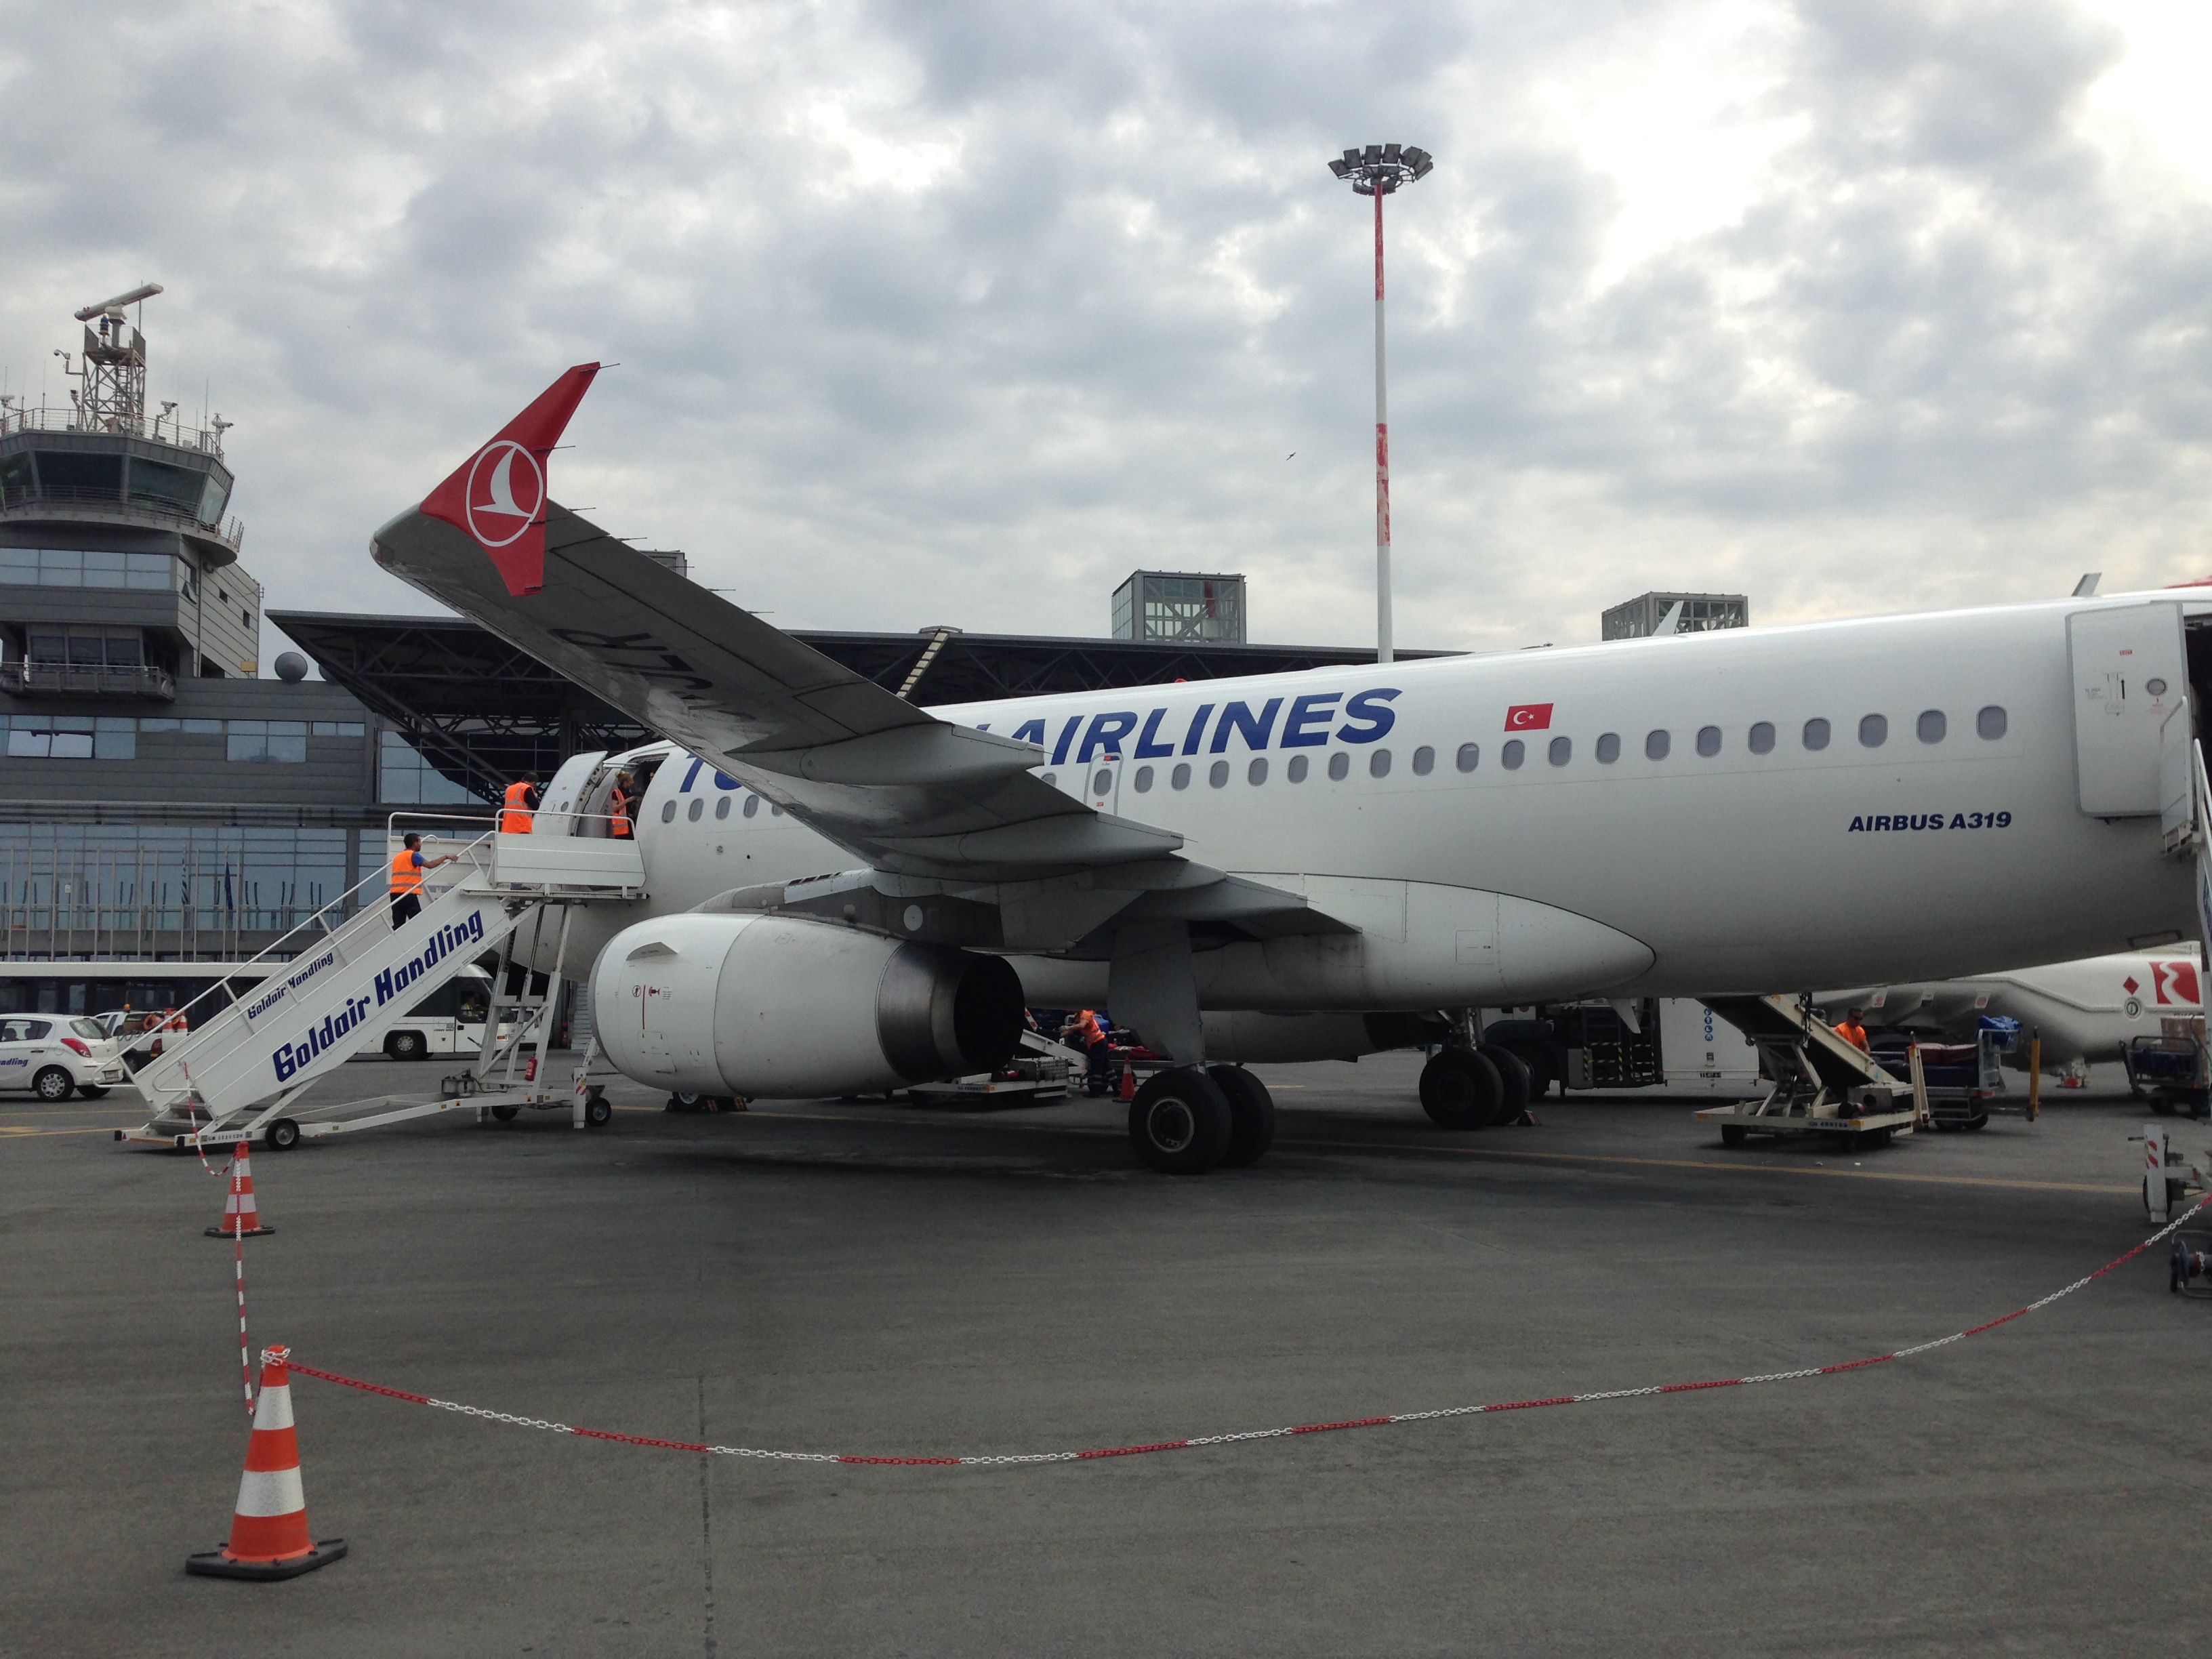 THY_Turkish Airlines_Airbus A319_TC-JLR_Thessaloniki Airport_May 2015